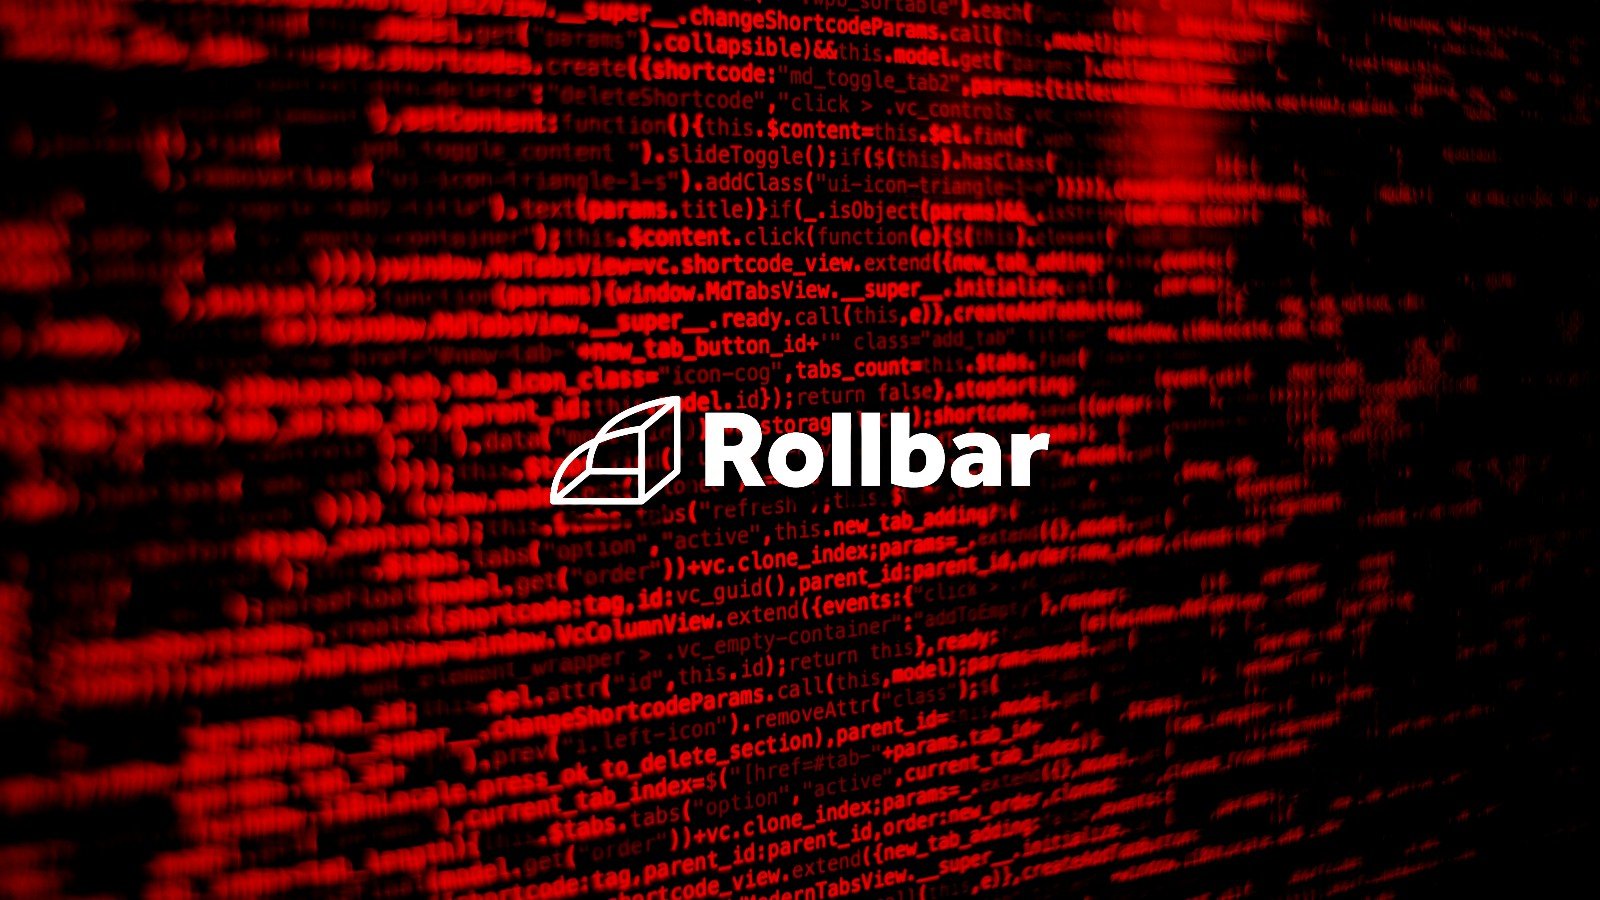 Rollbar discloses data breach after hackers stole access tokens – Source: www.bleepingcomputer.com